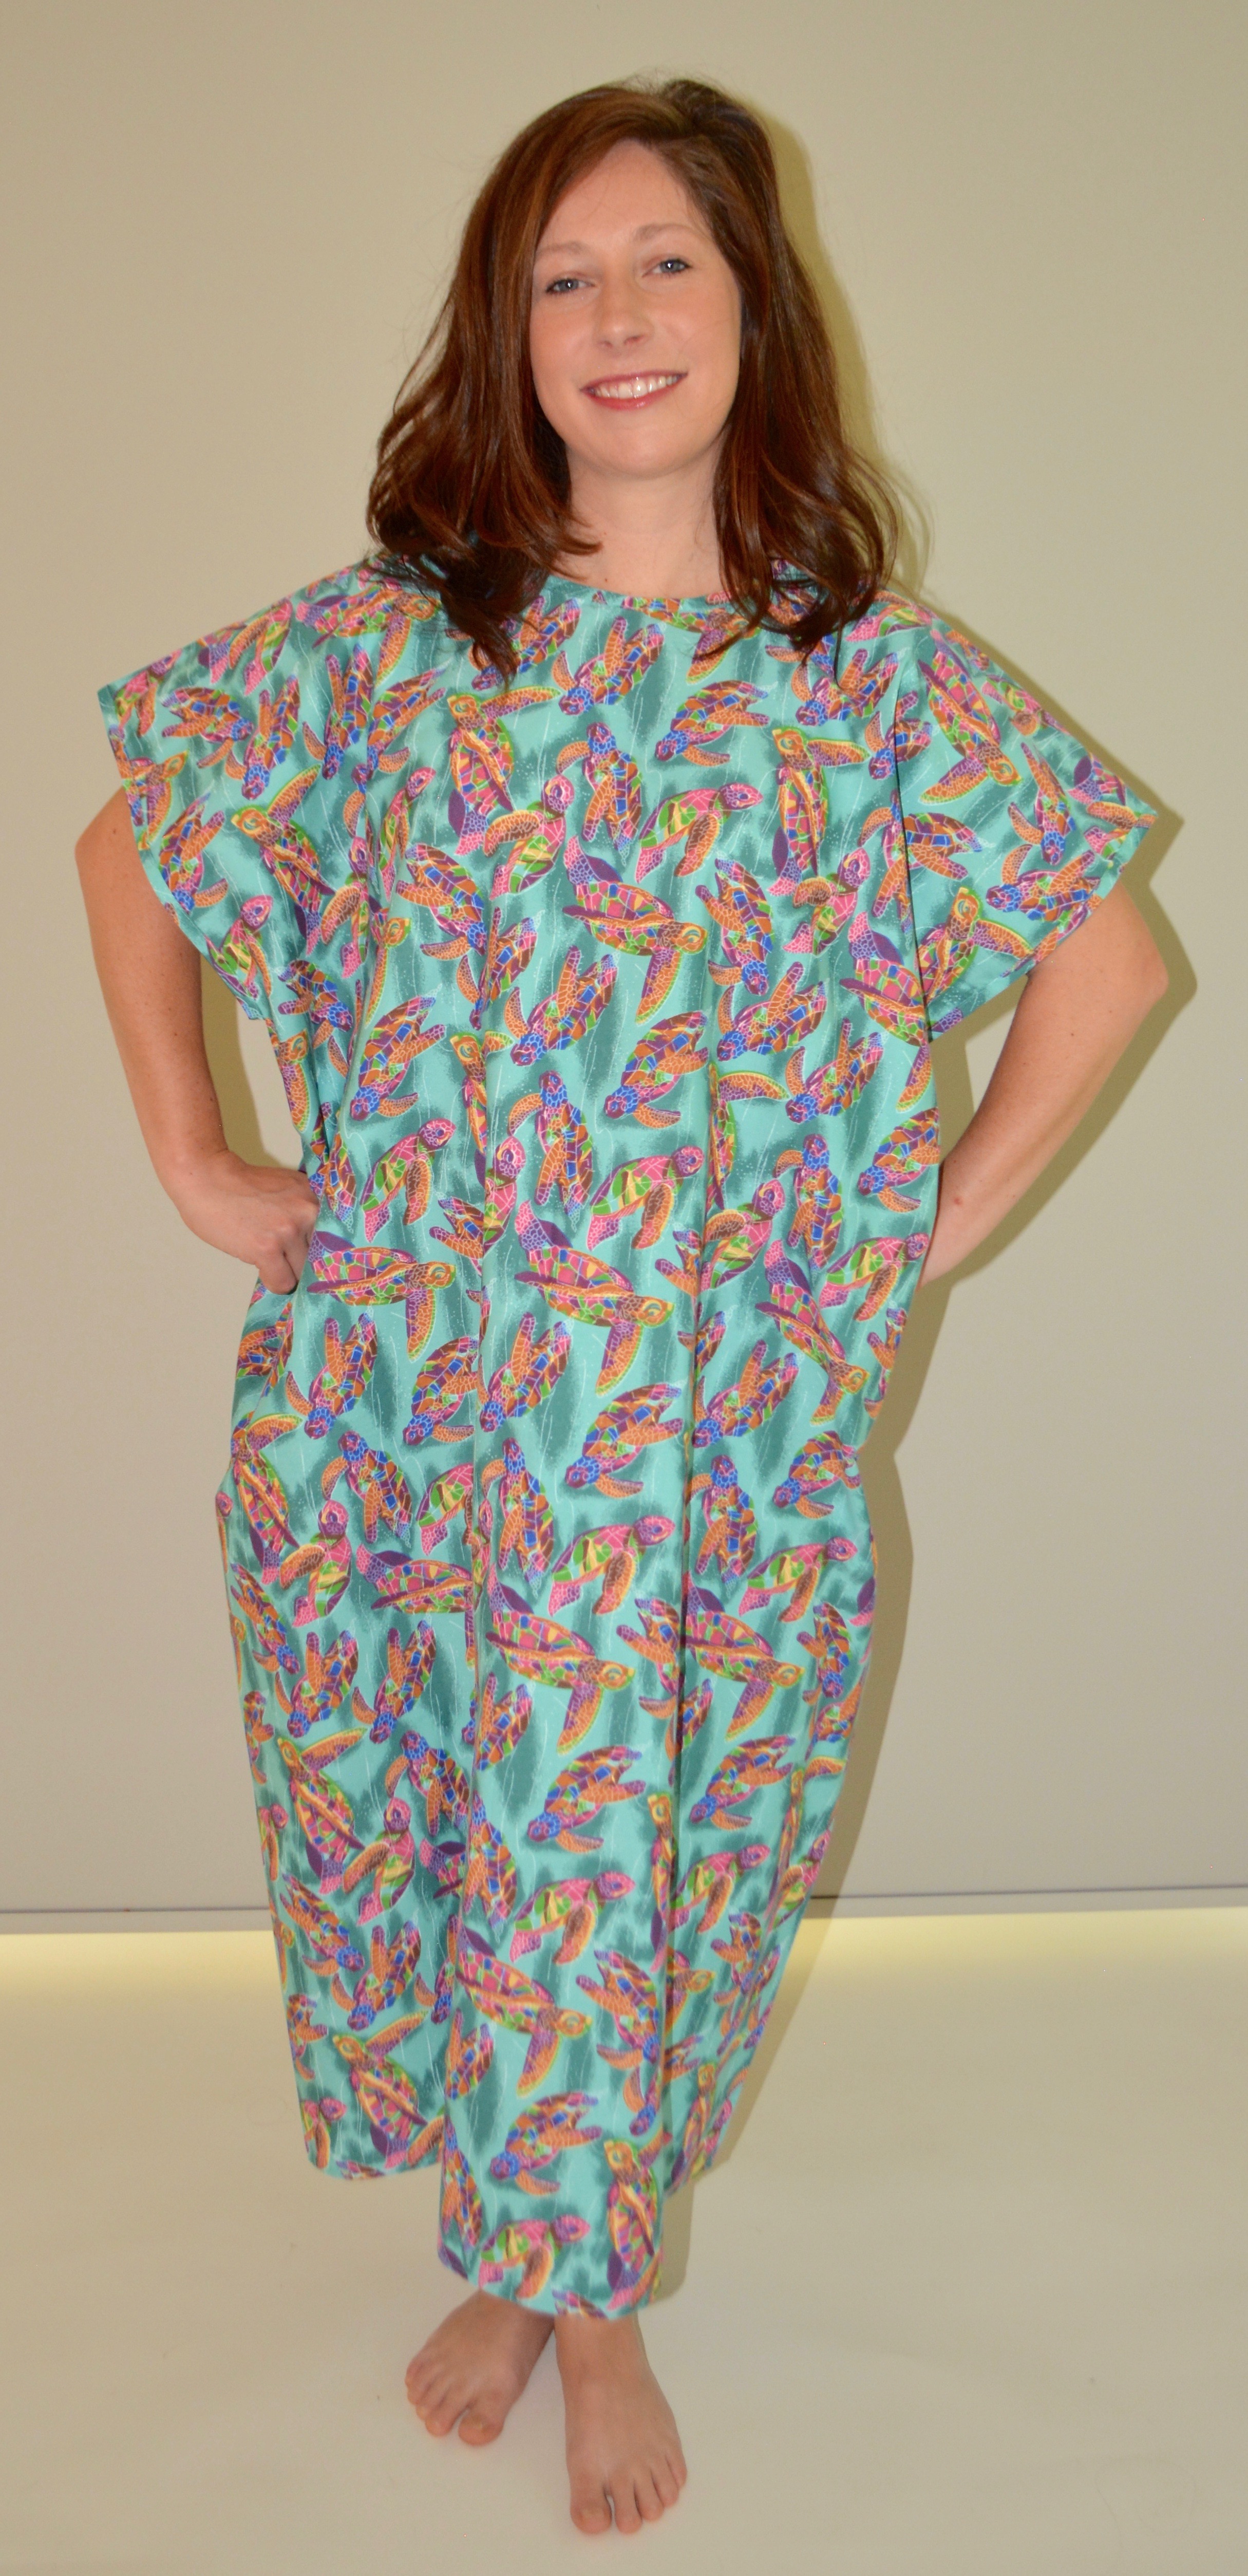 Patient Gowns - Hospital Gowns - Medical Robes - Health Gear Inc.